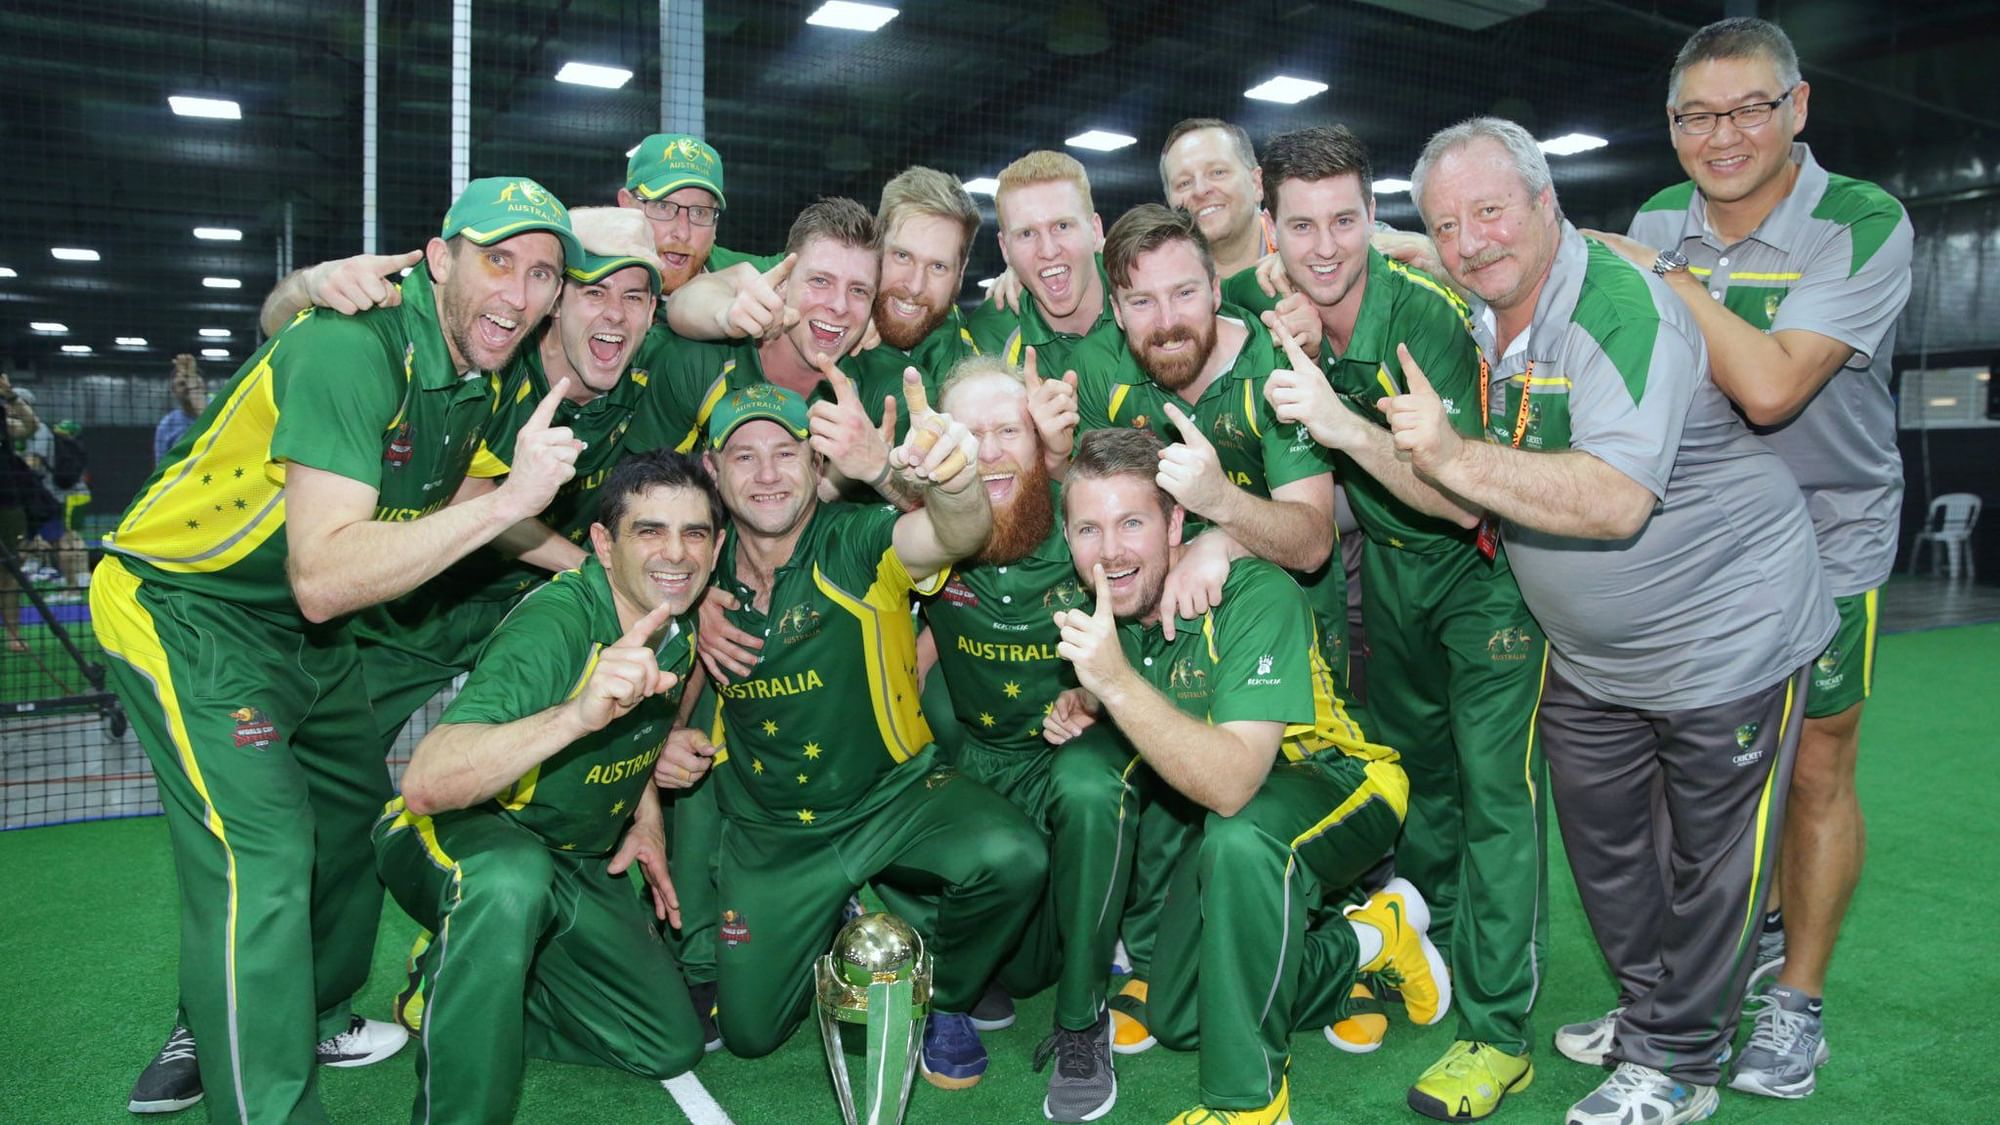 Australia won in all four divisions at the 2017 Indoor Cricket World Cup in Dubai.